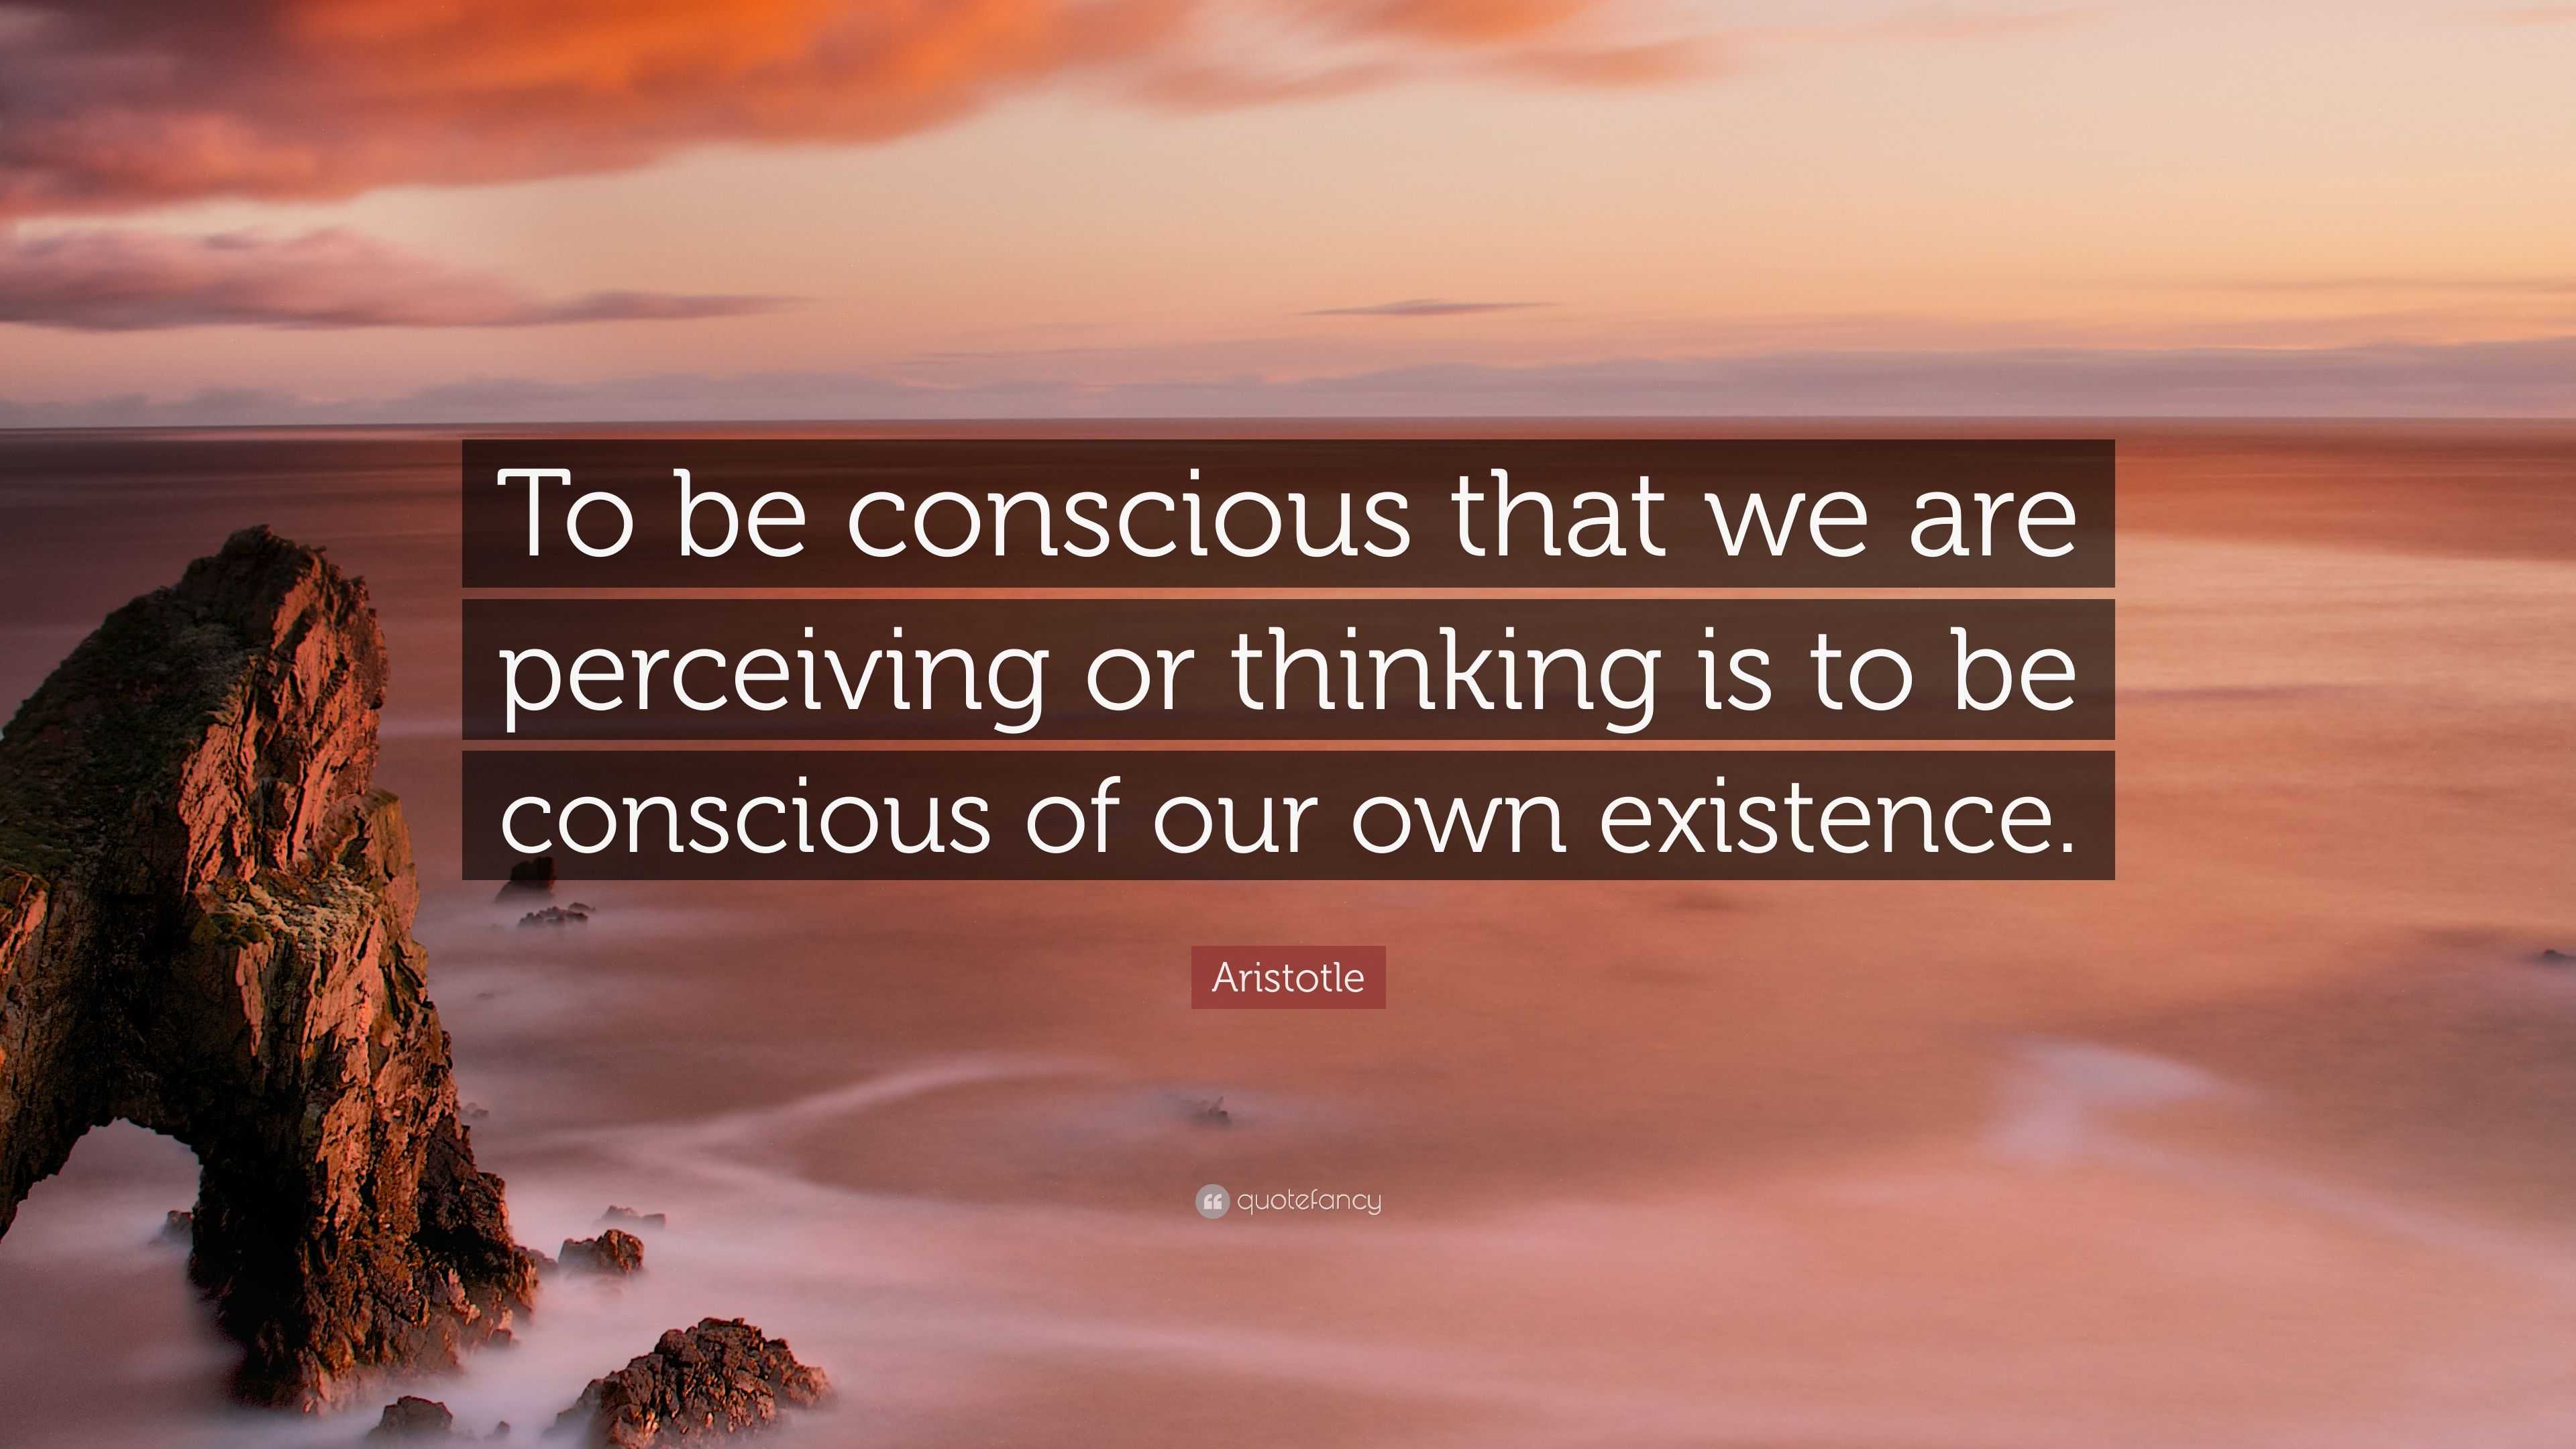 Aristotle Quote: “To be conscious that we are perceiving or thinking is ...